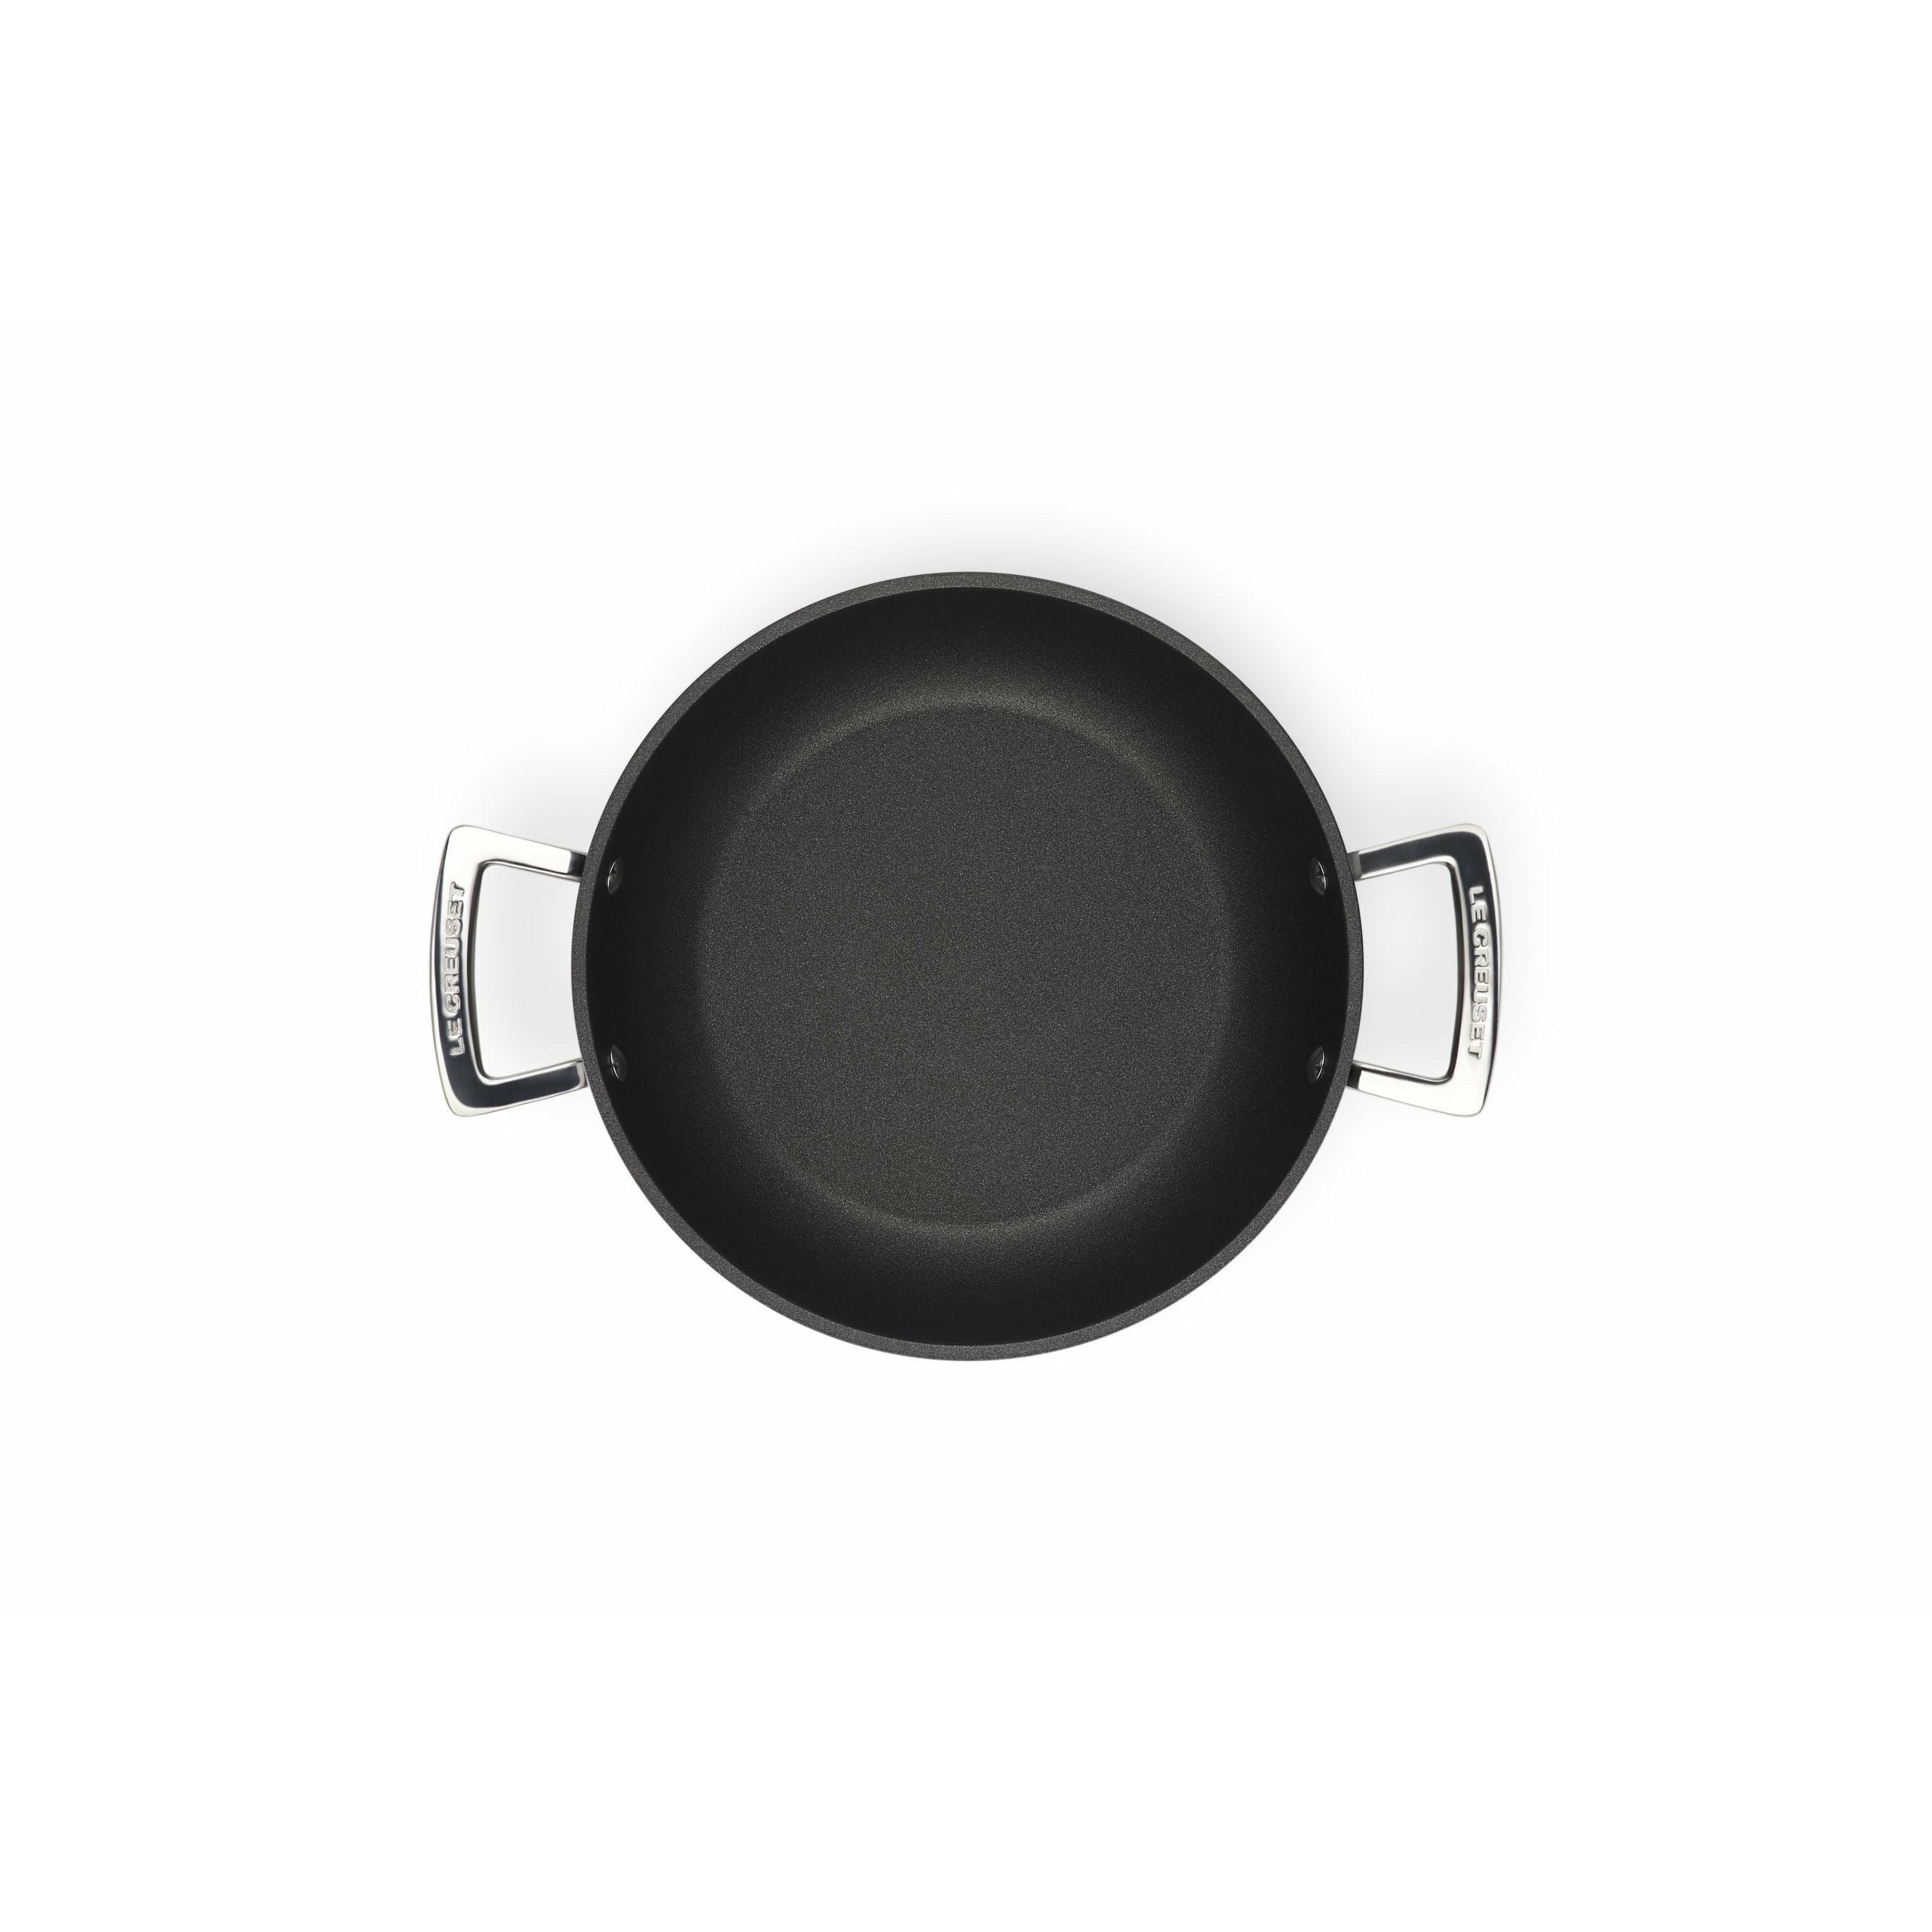 Le Creuset Alu Professional Pan With Glass Lid, 24 Cm